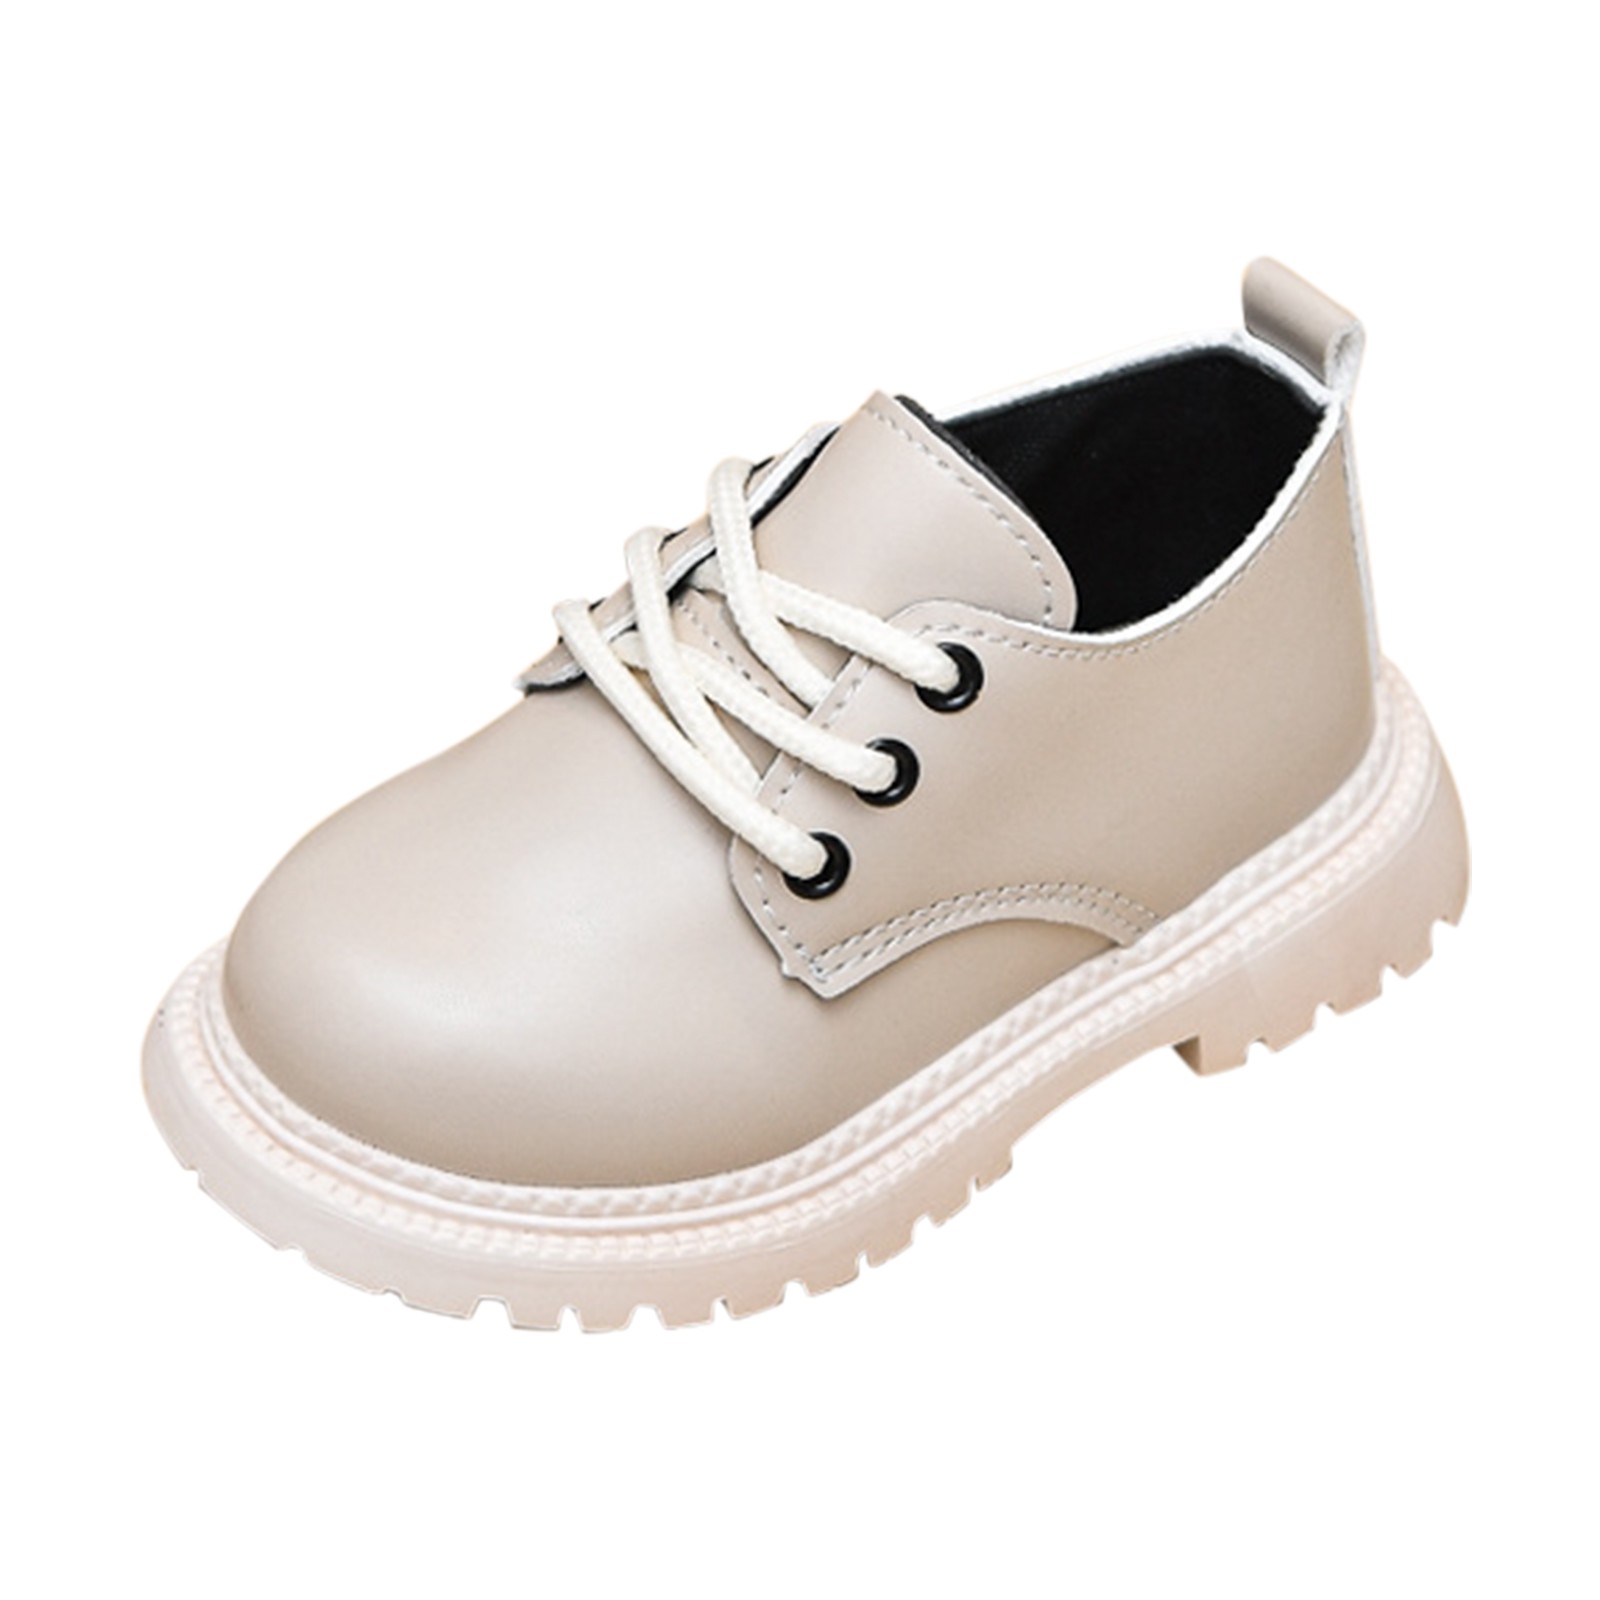 Boys Girls Dress Shoes Hook And Loop Kids School Formal Casual For ...